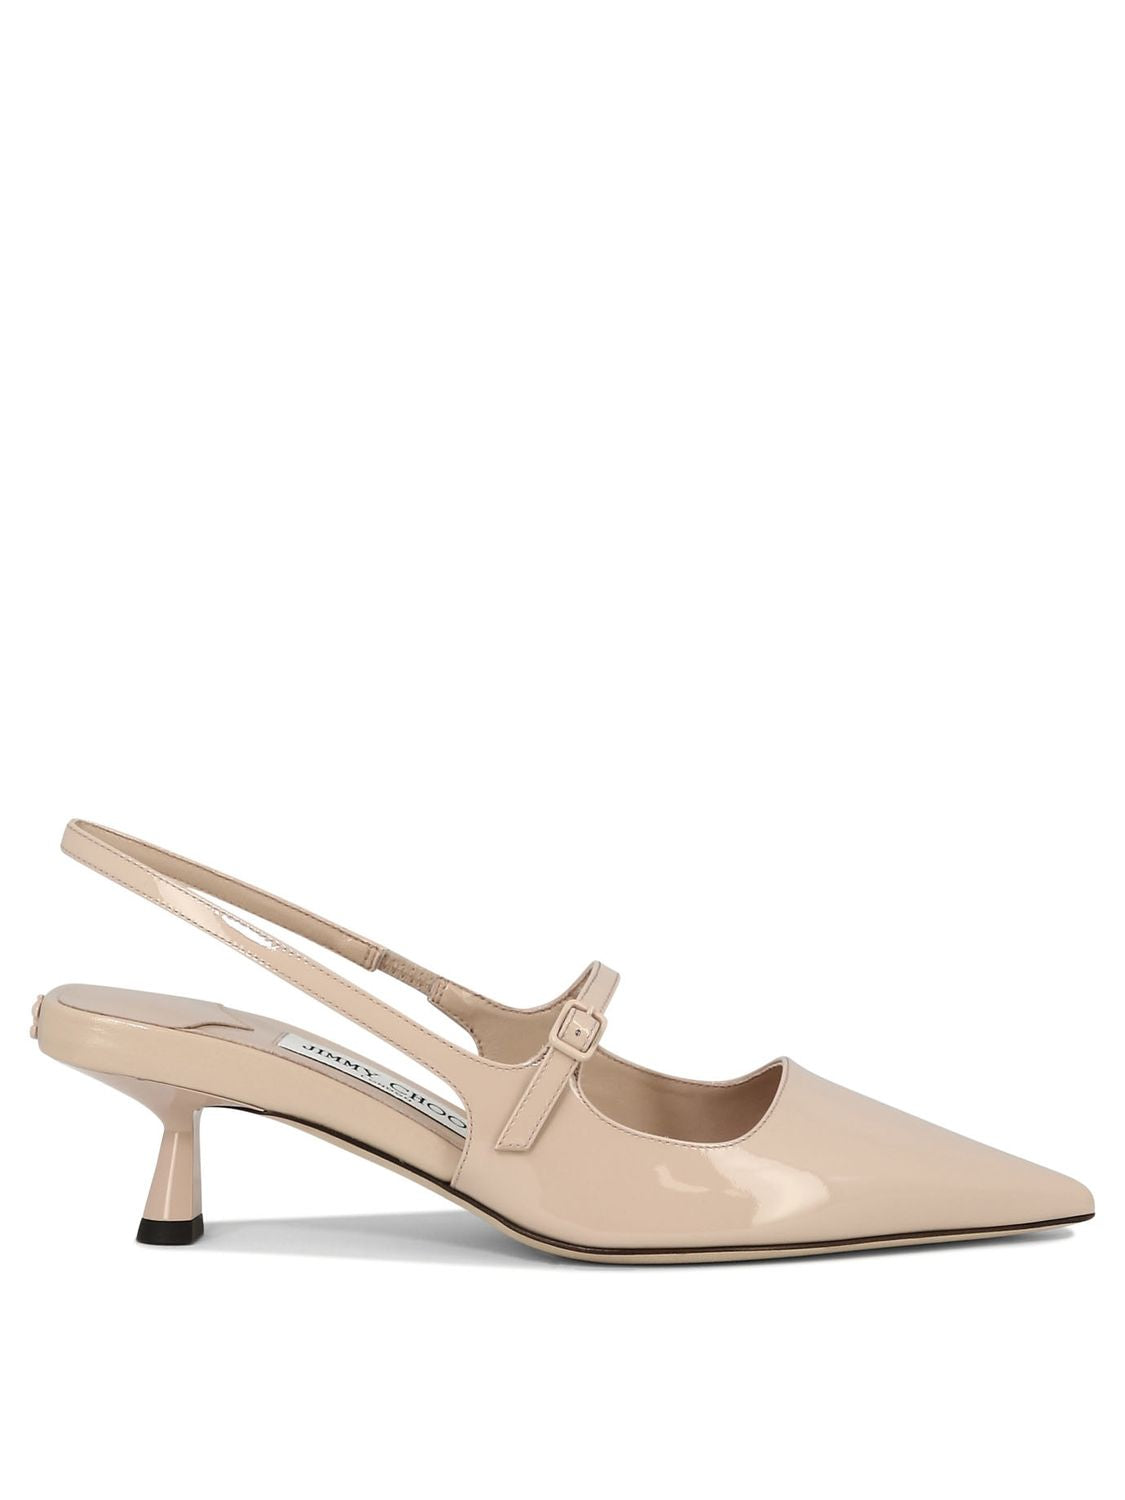 JIMMY CHOO Sophisticated Slingbacks in Pink Leather for Women